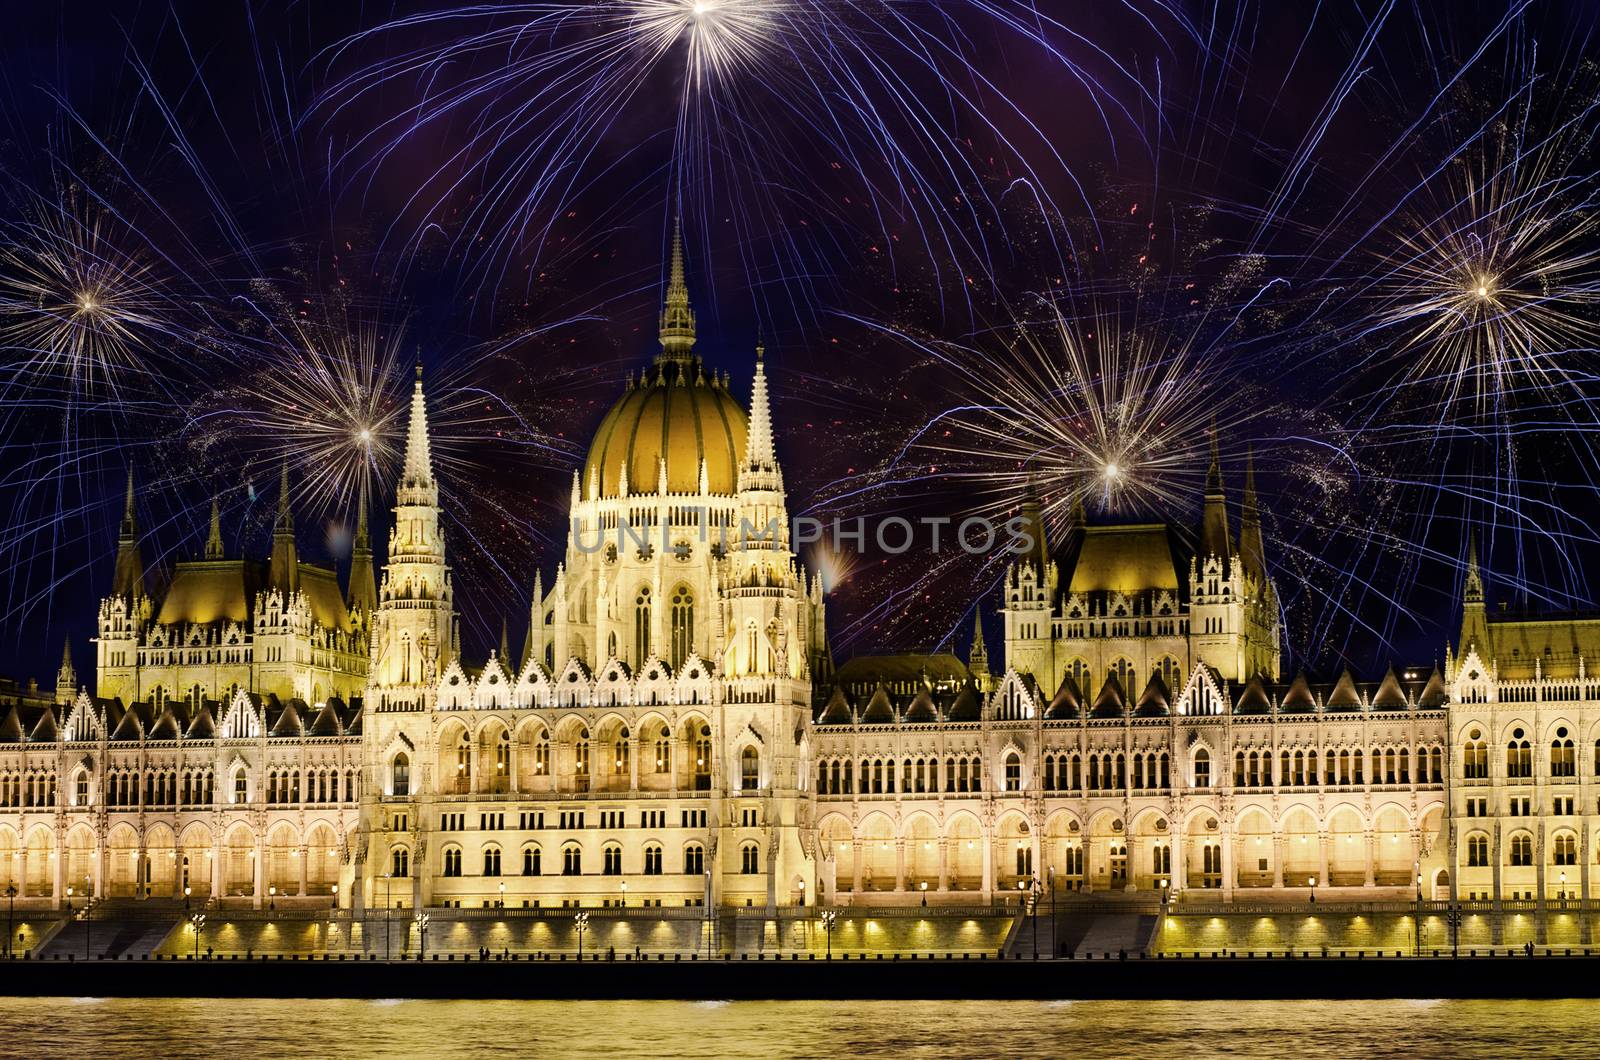 Fireworks and Hungarian parliament, Budapest by sarkao